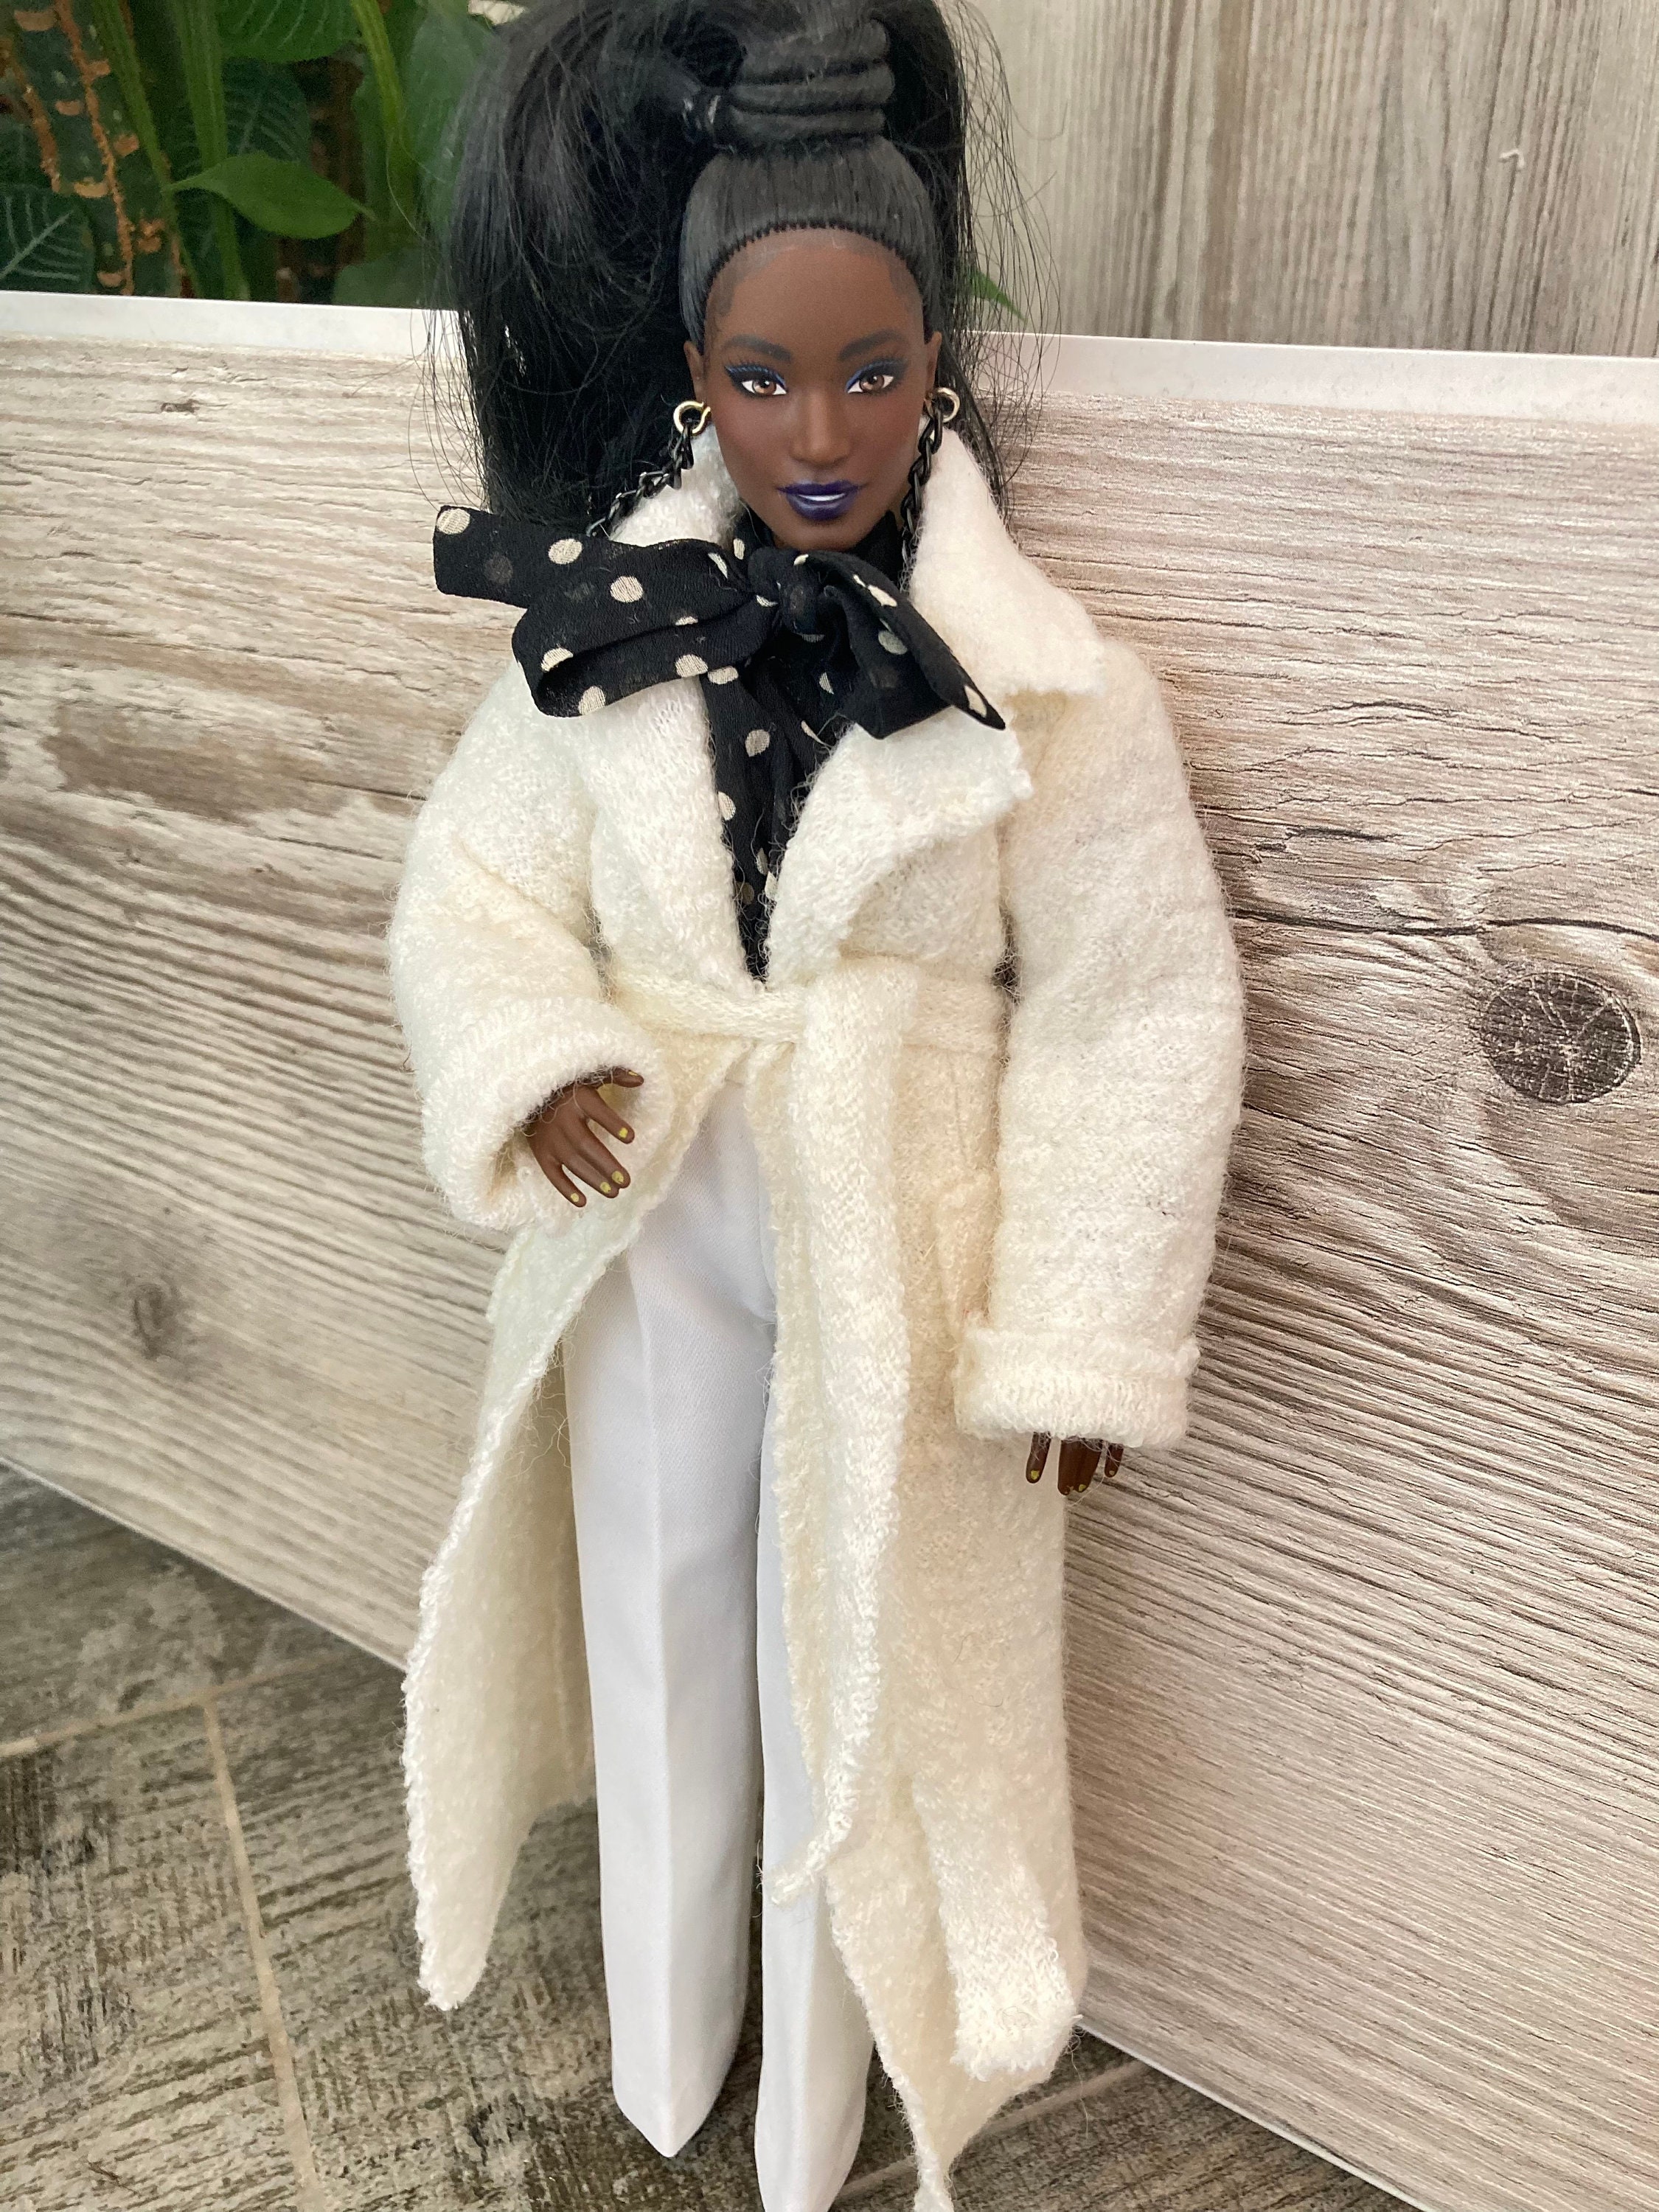 White Wool Coat for Curvy and Classic Barbie Doll - Etsy